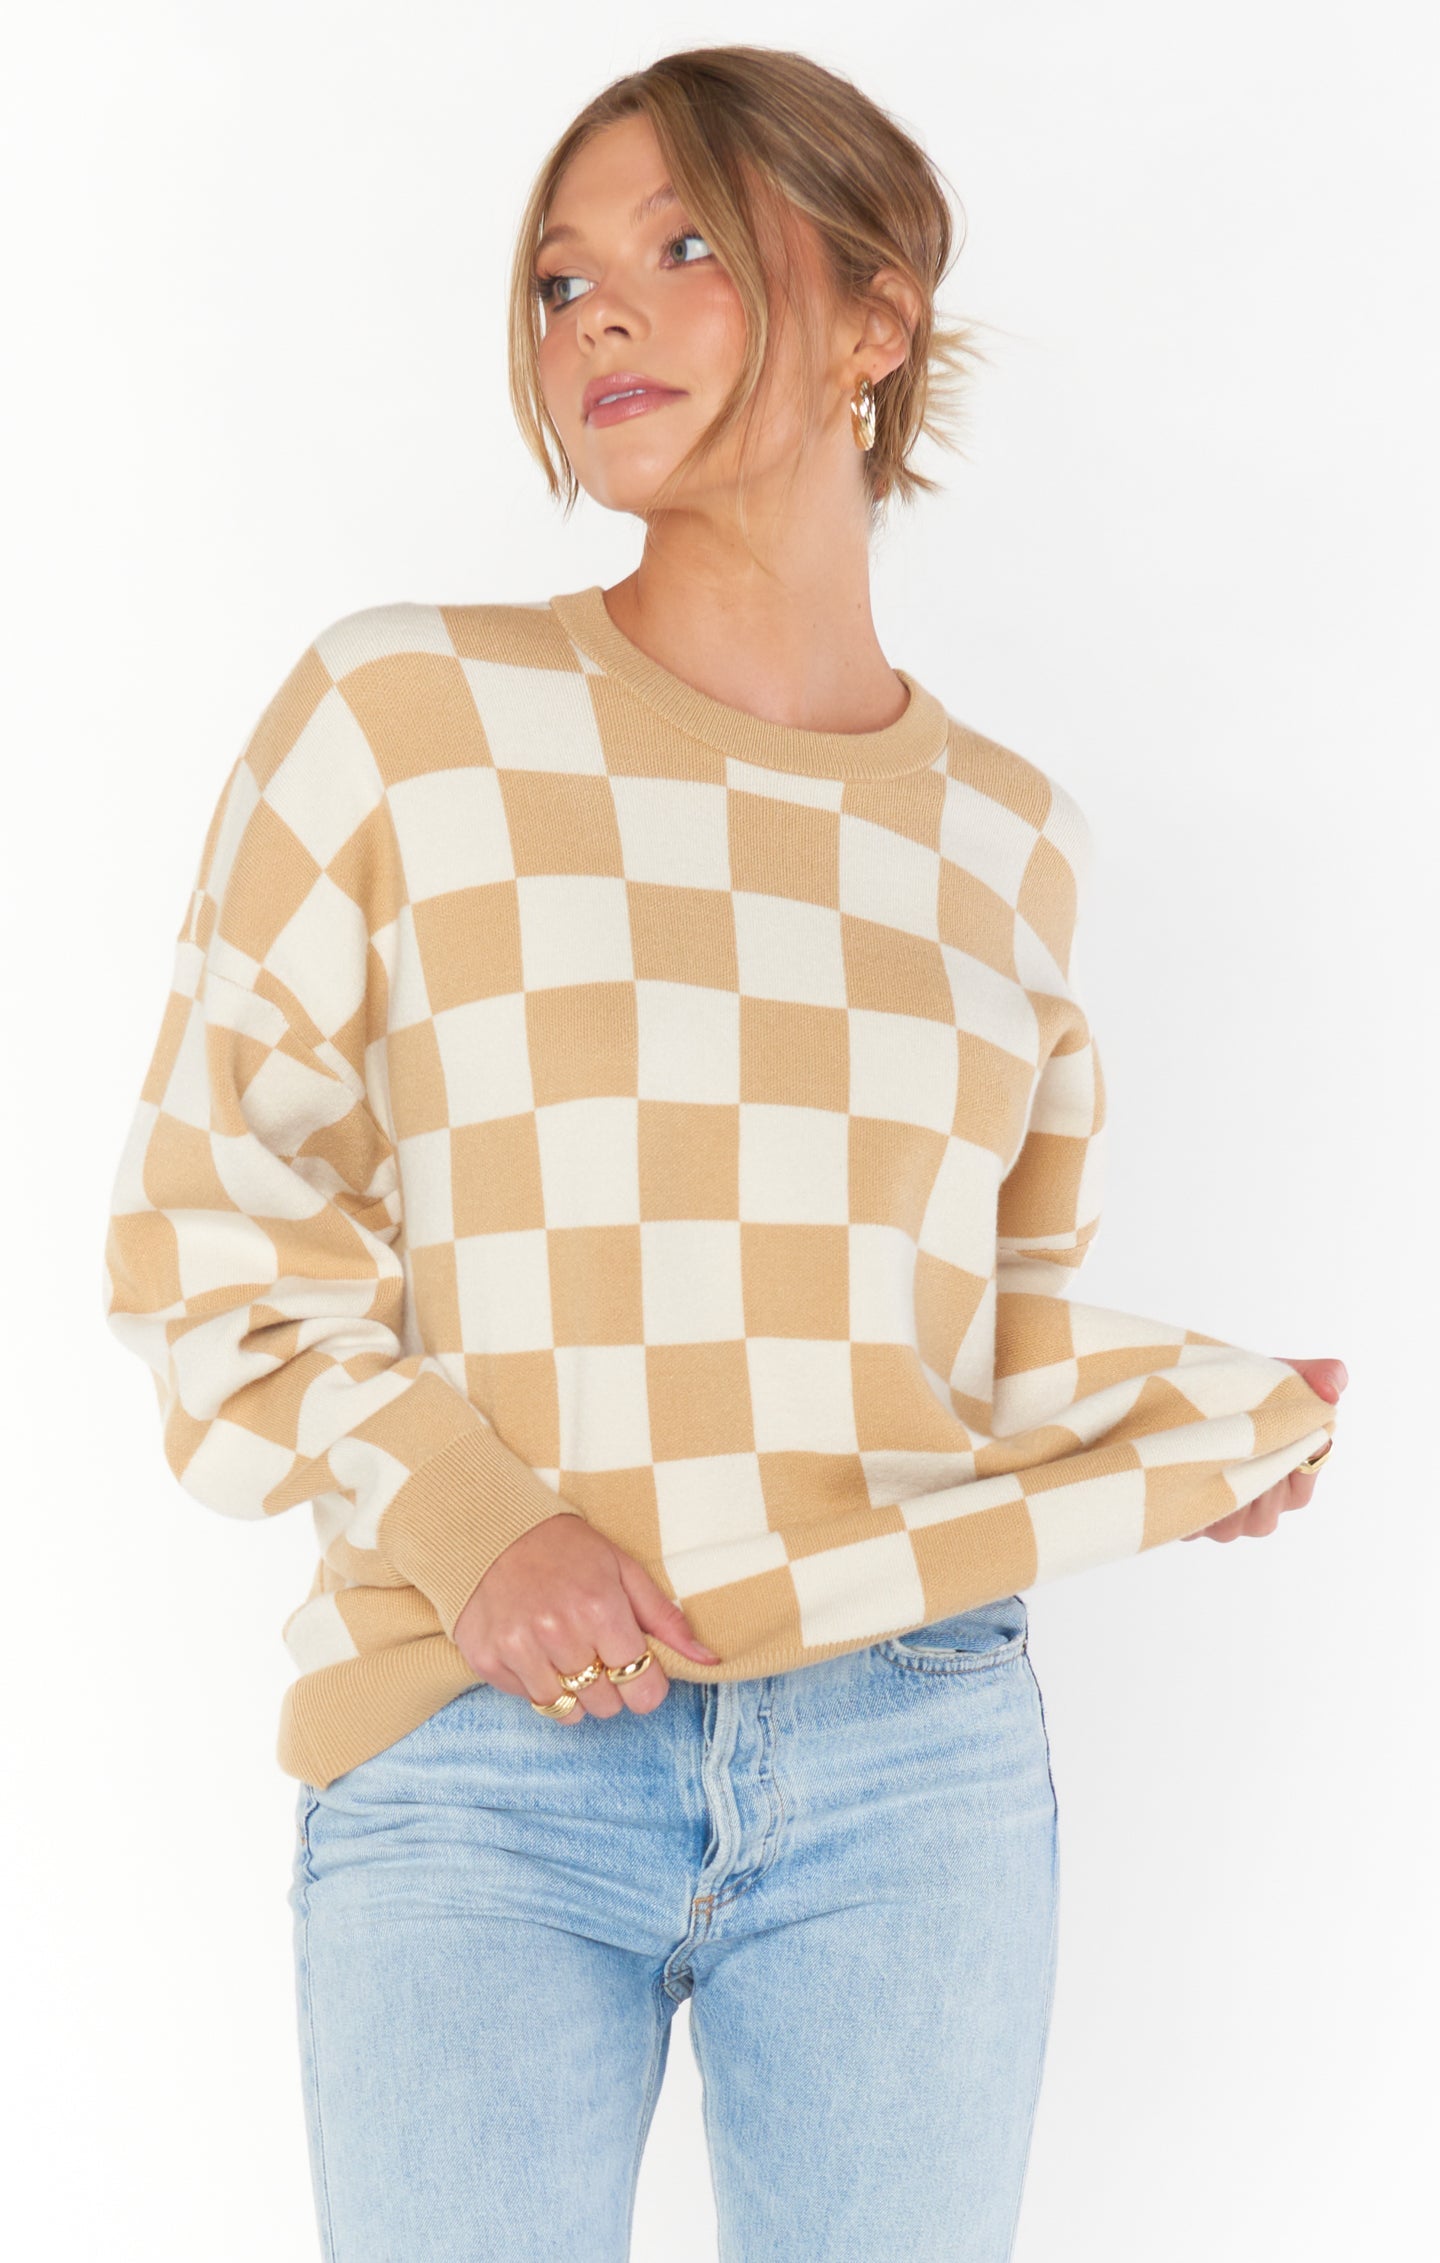 Scout Sweater in Tan Checker Knit